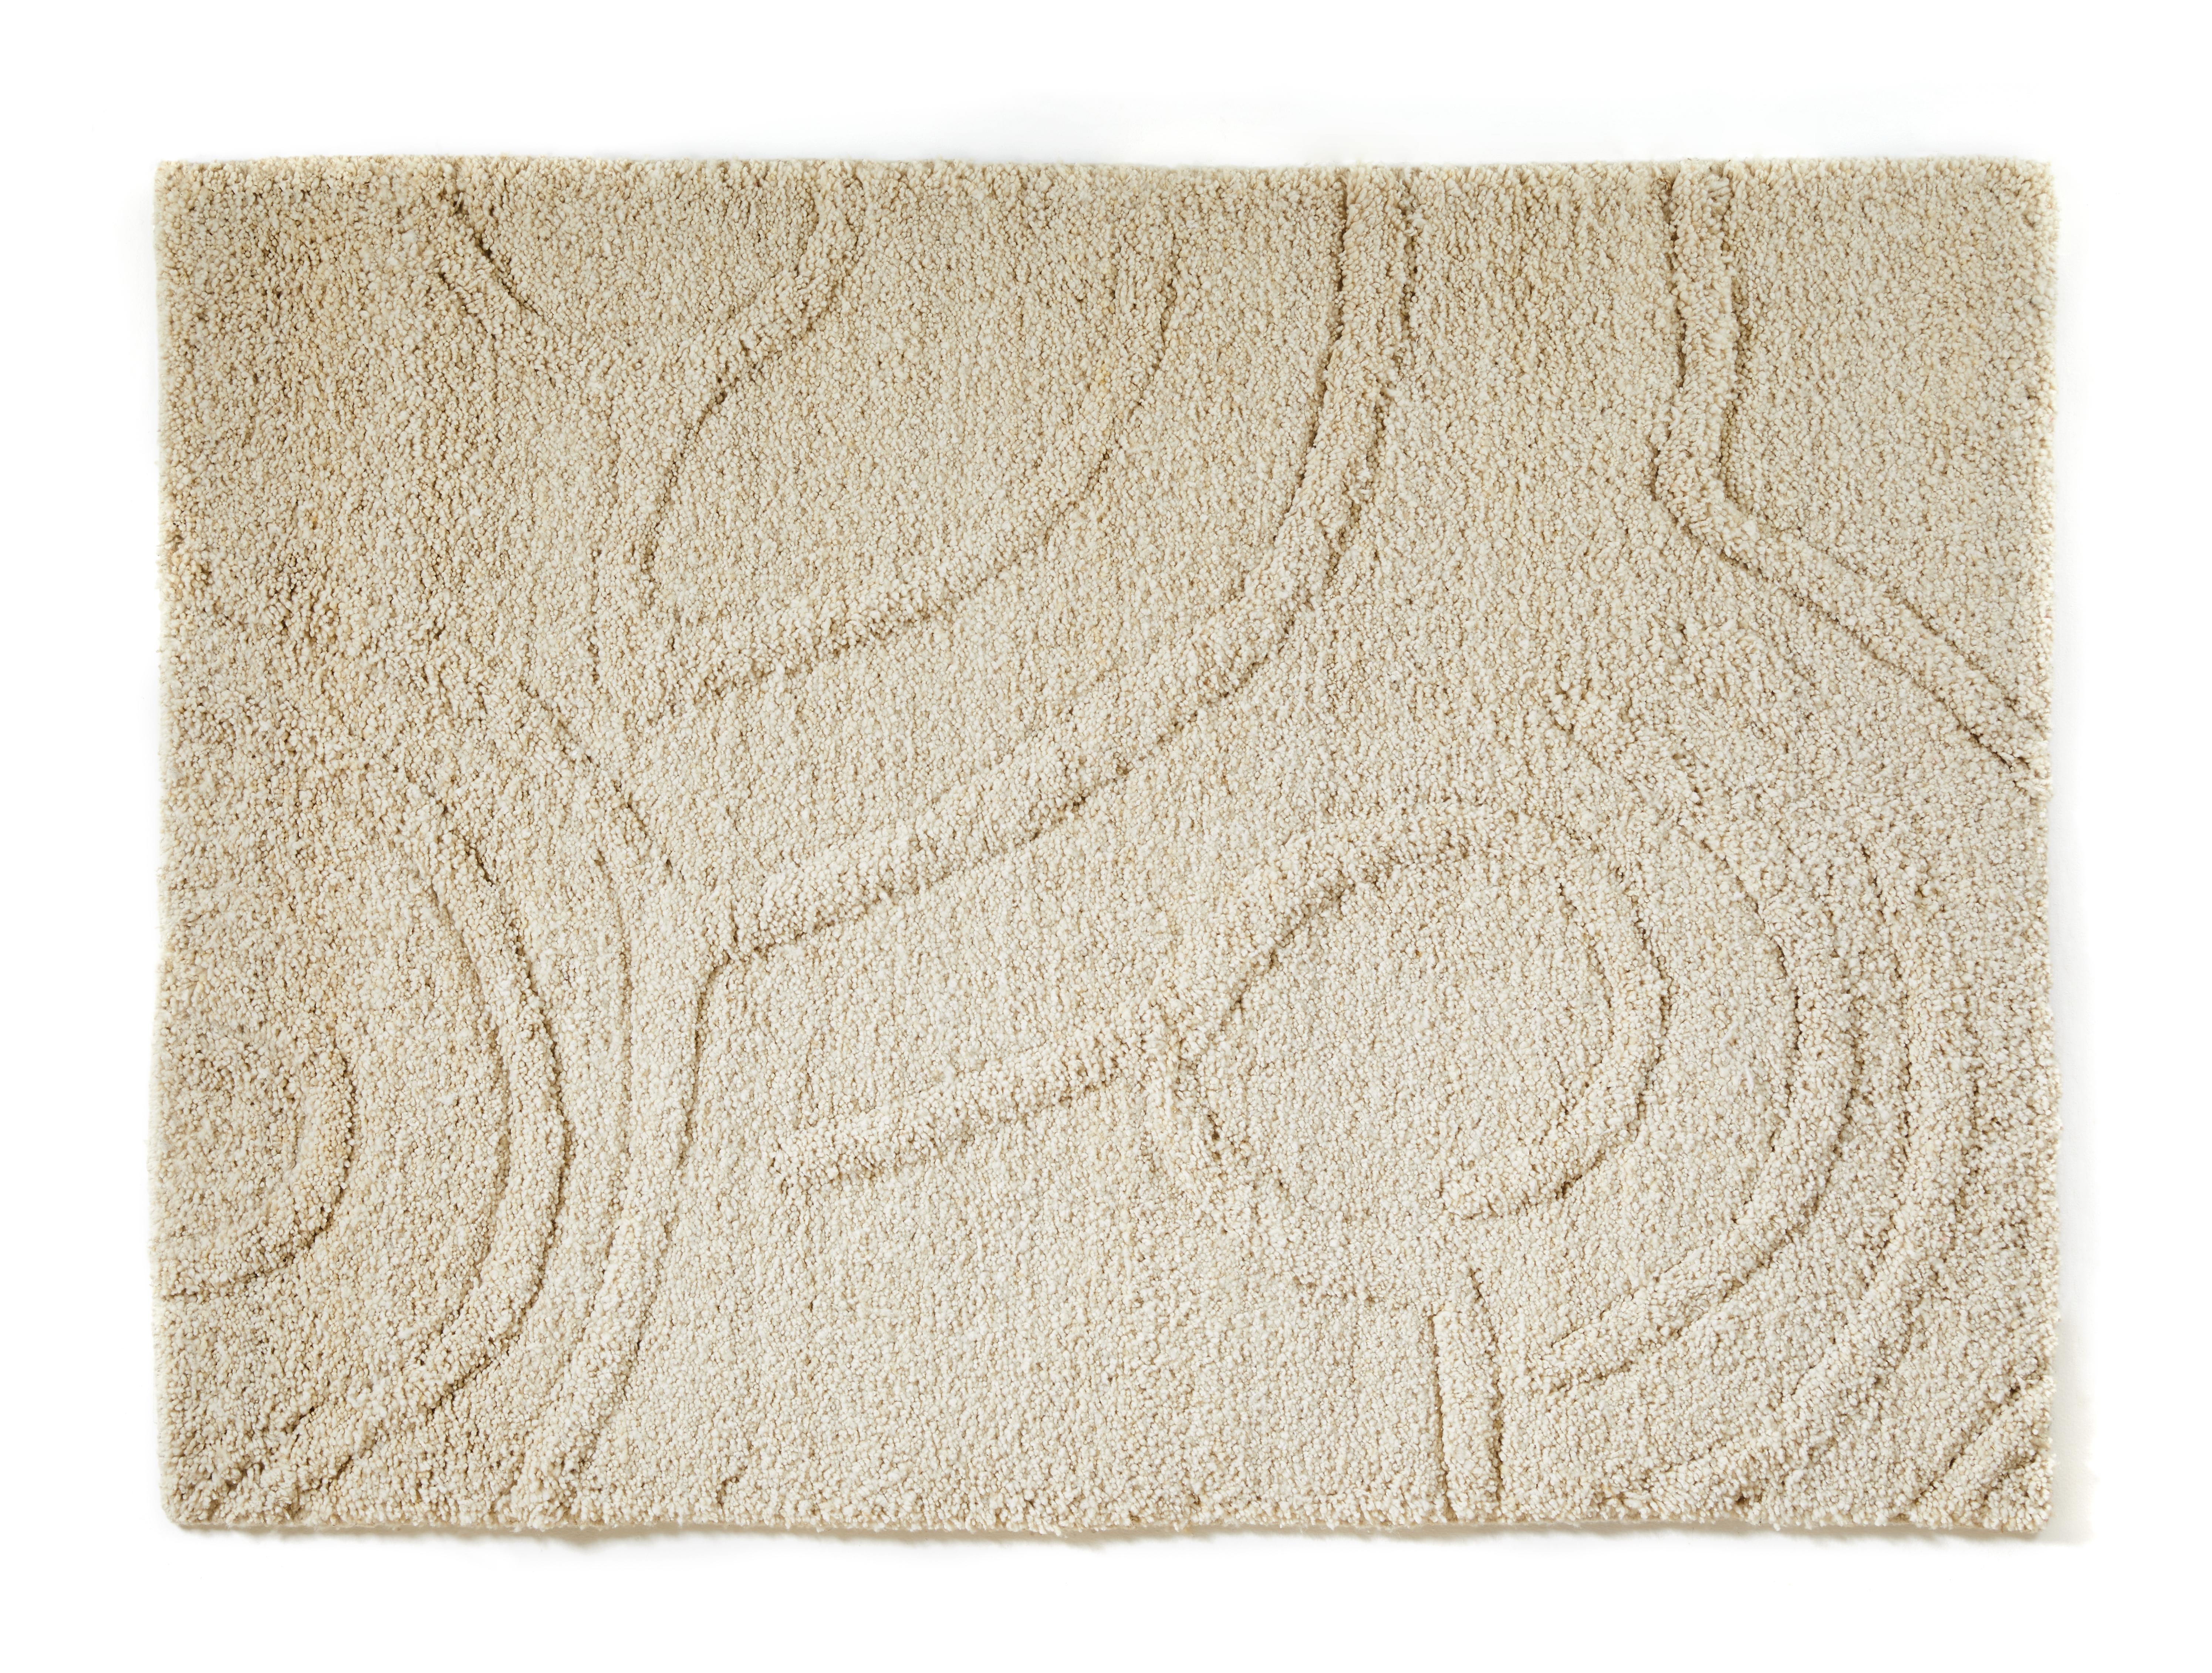 Large Zenues rug by Sebastian Herkner
Materials: 100 % natural virgin wool. 
Technique: Hand-woven in Colombia.
Dimensions: W 200 x L 300 cm 
Available in size small.

The striking Zenues rug, a design by Sebastian Herkner, is inspired by old